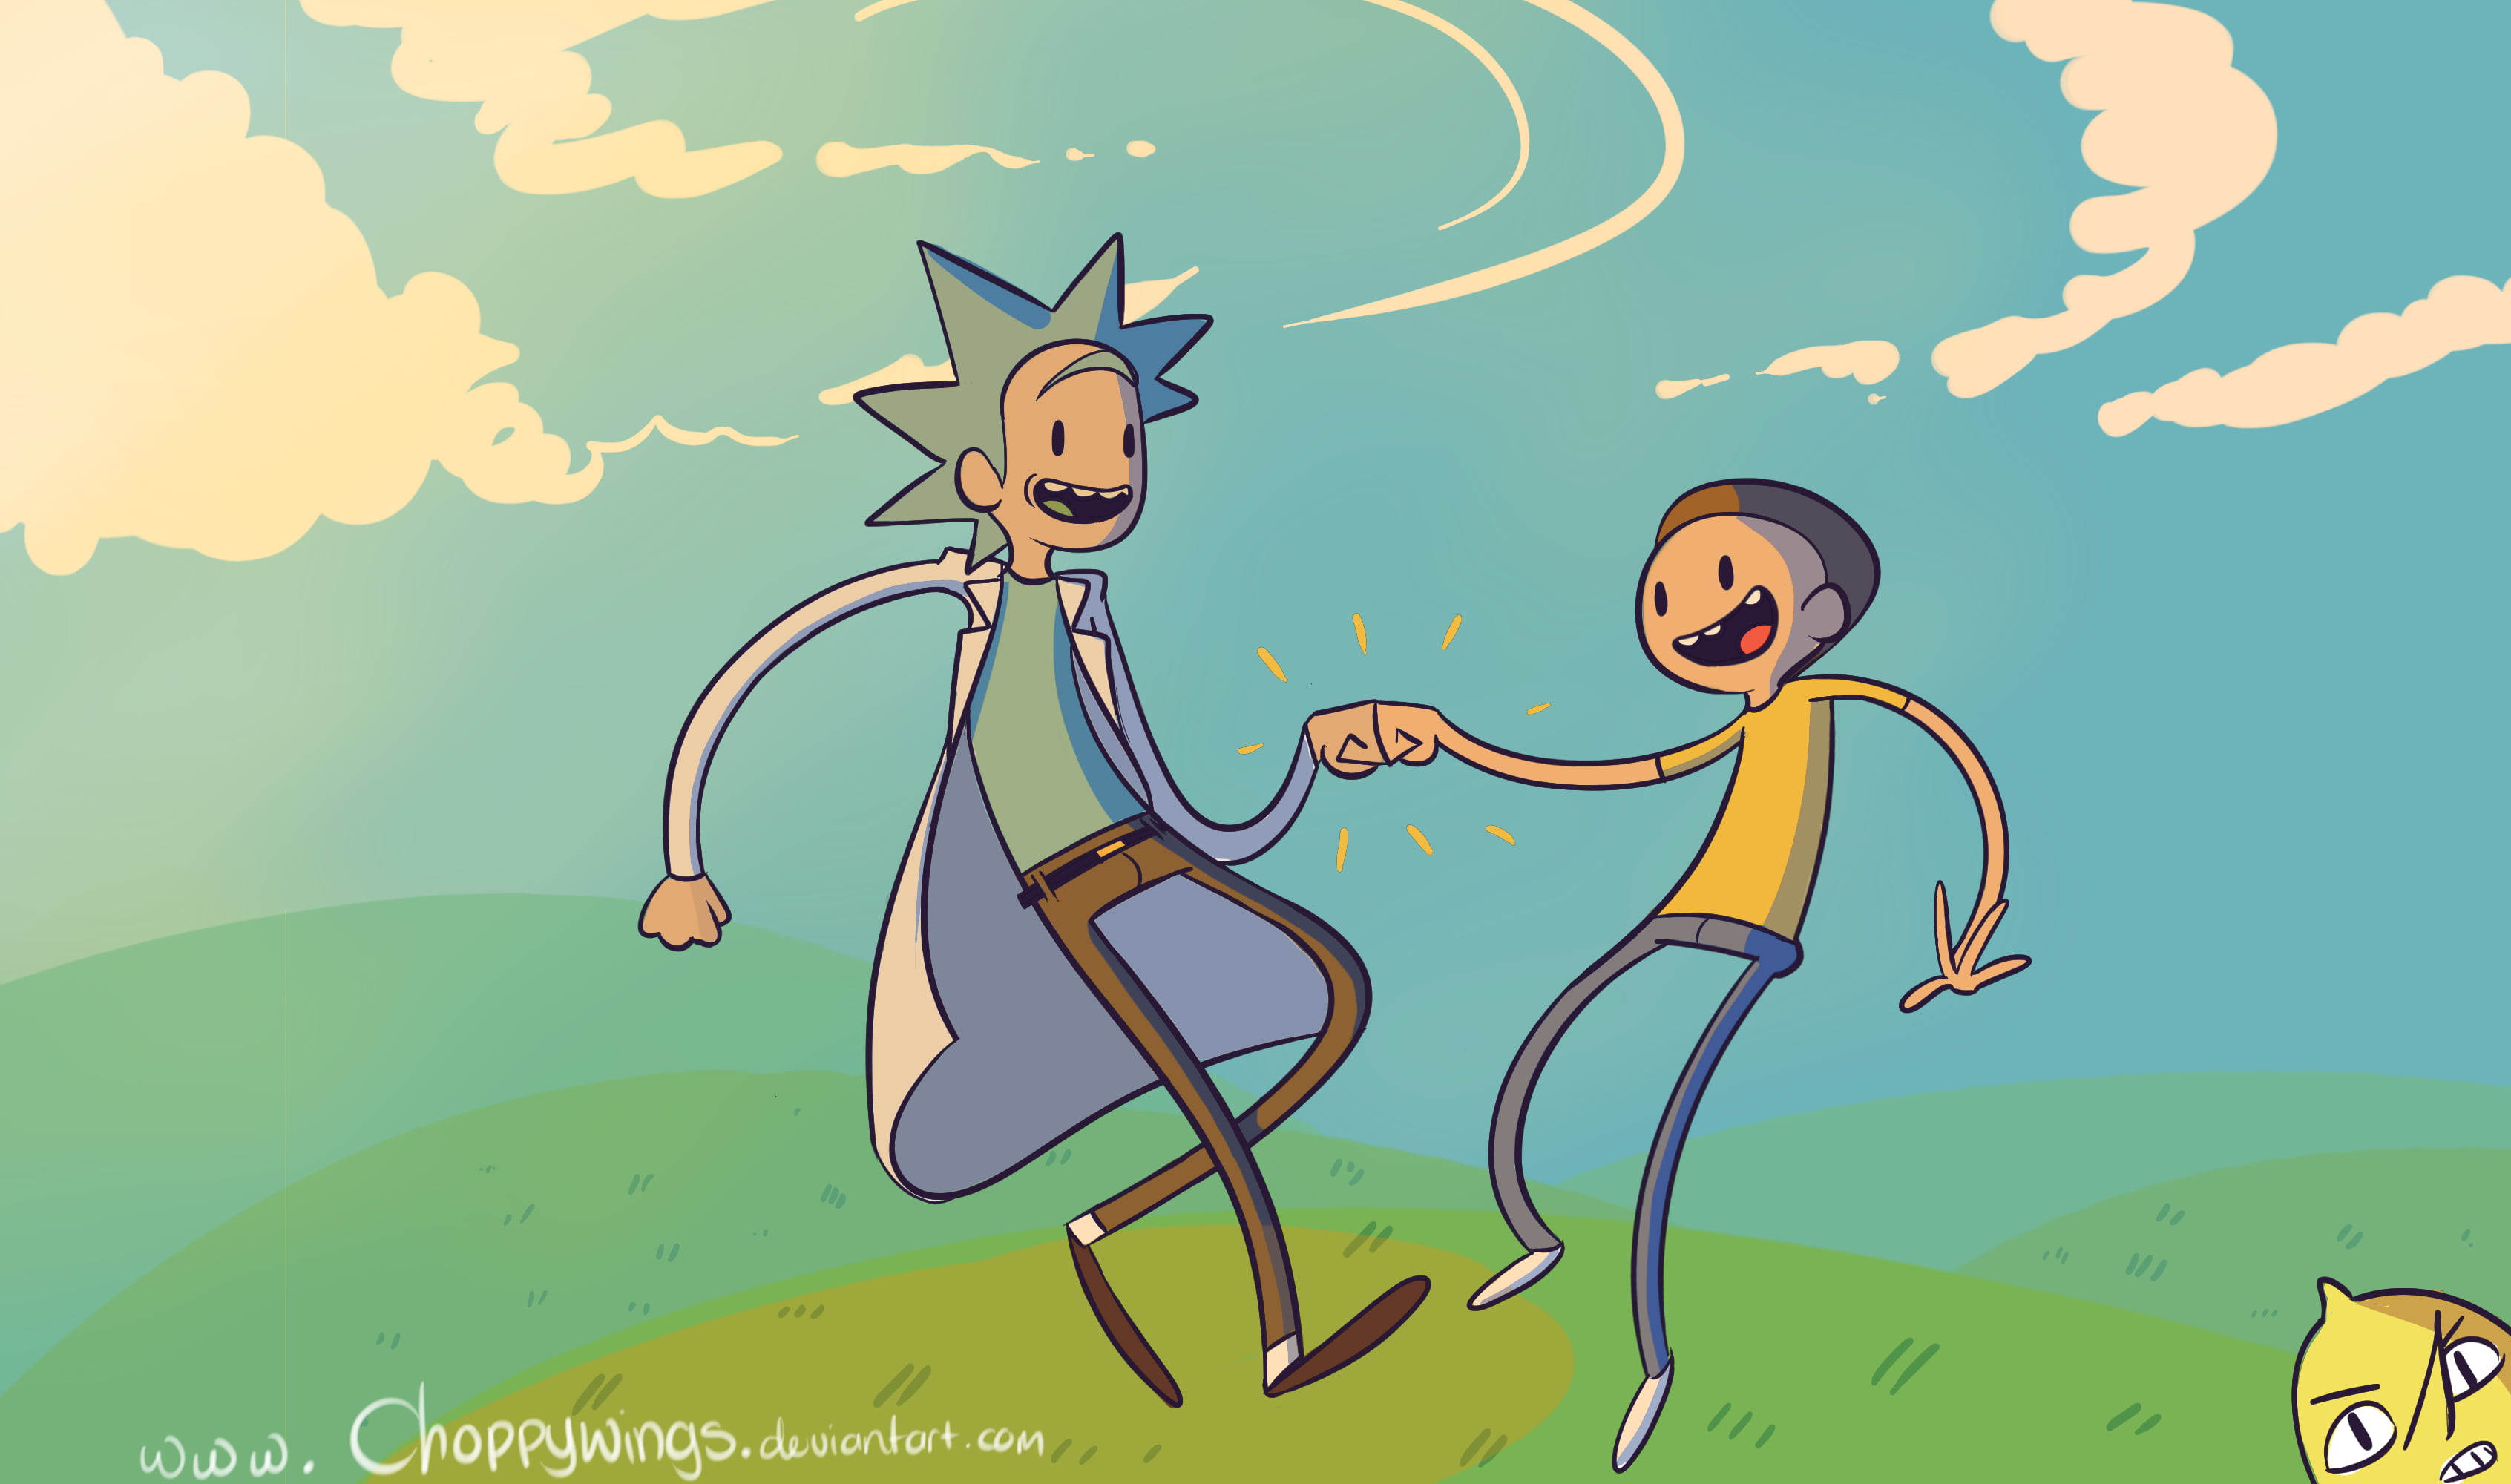 Rick and Morty illustration, Rick and Morty, Adventure Time, crossover, Rick Sanchez